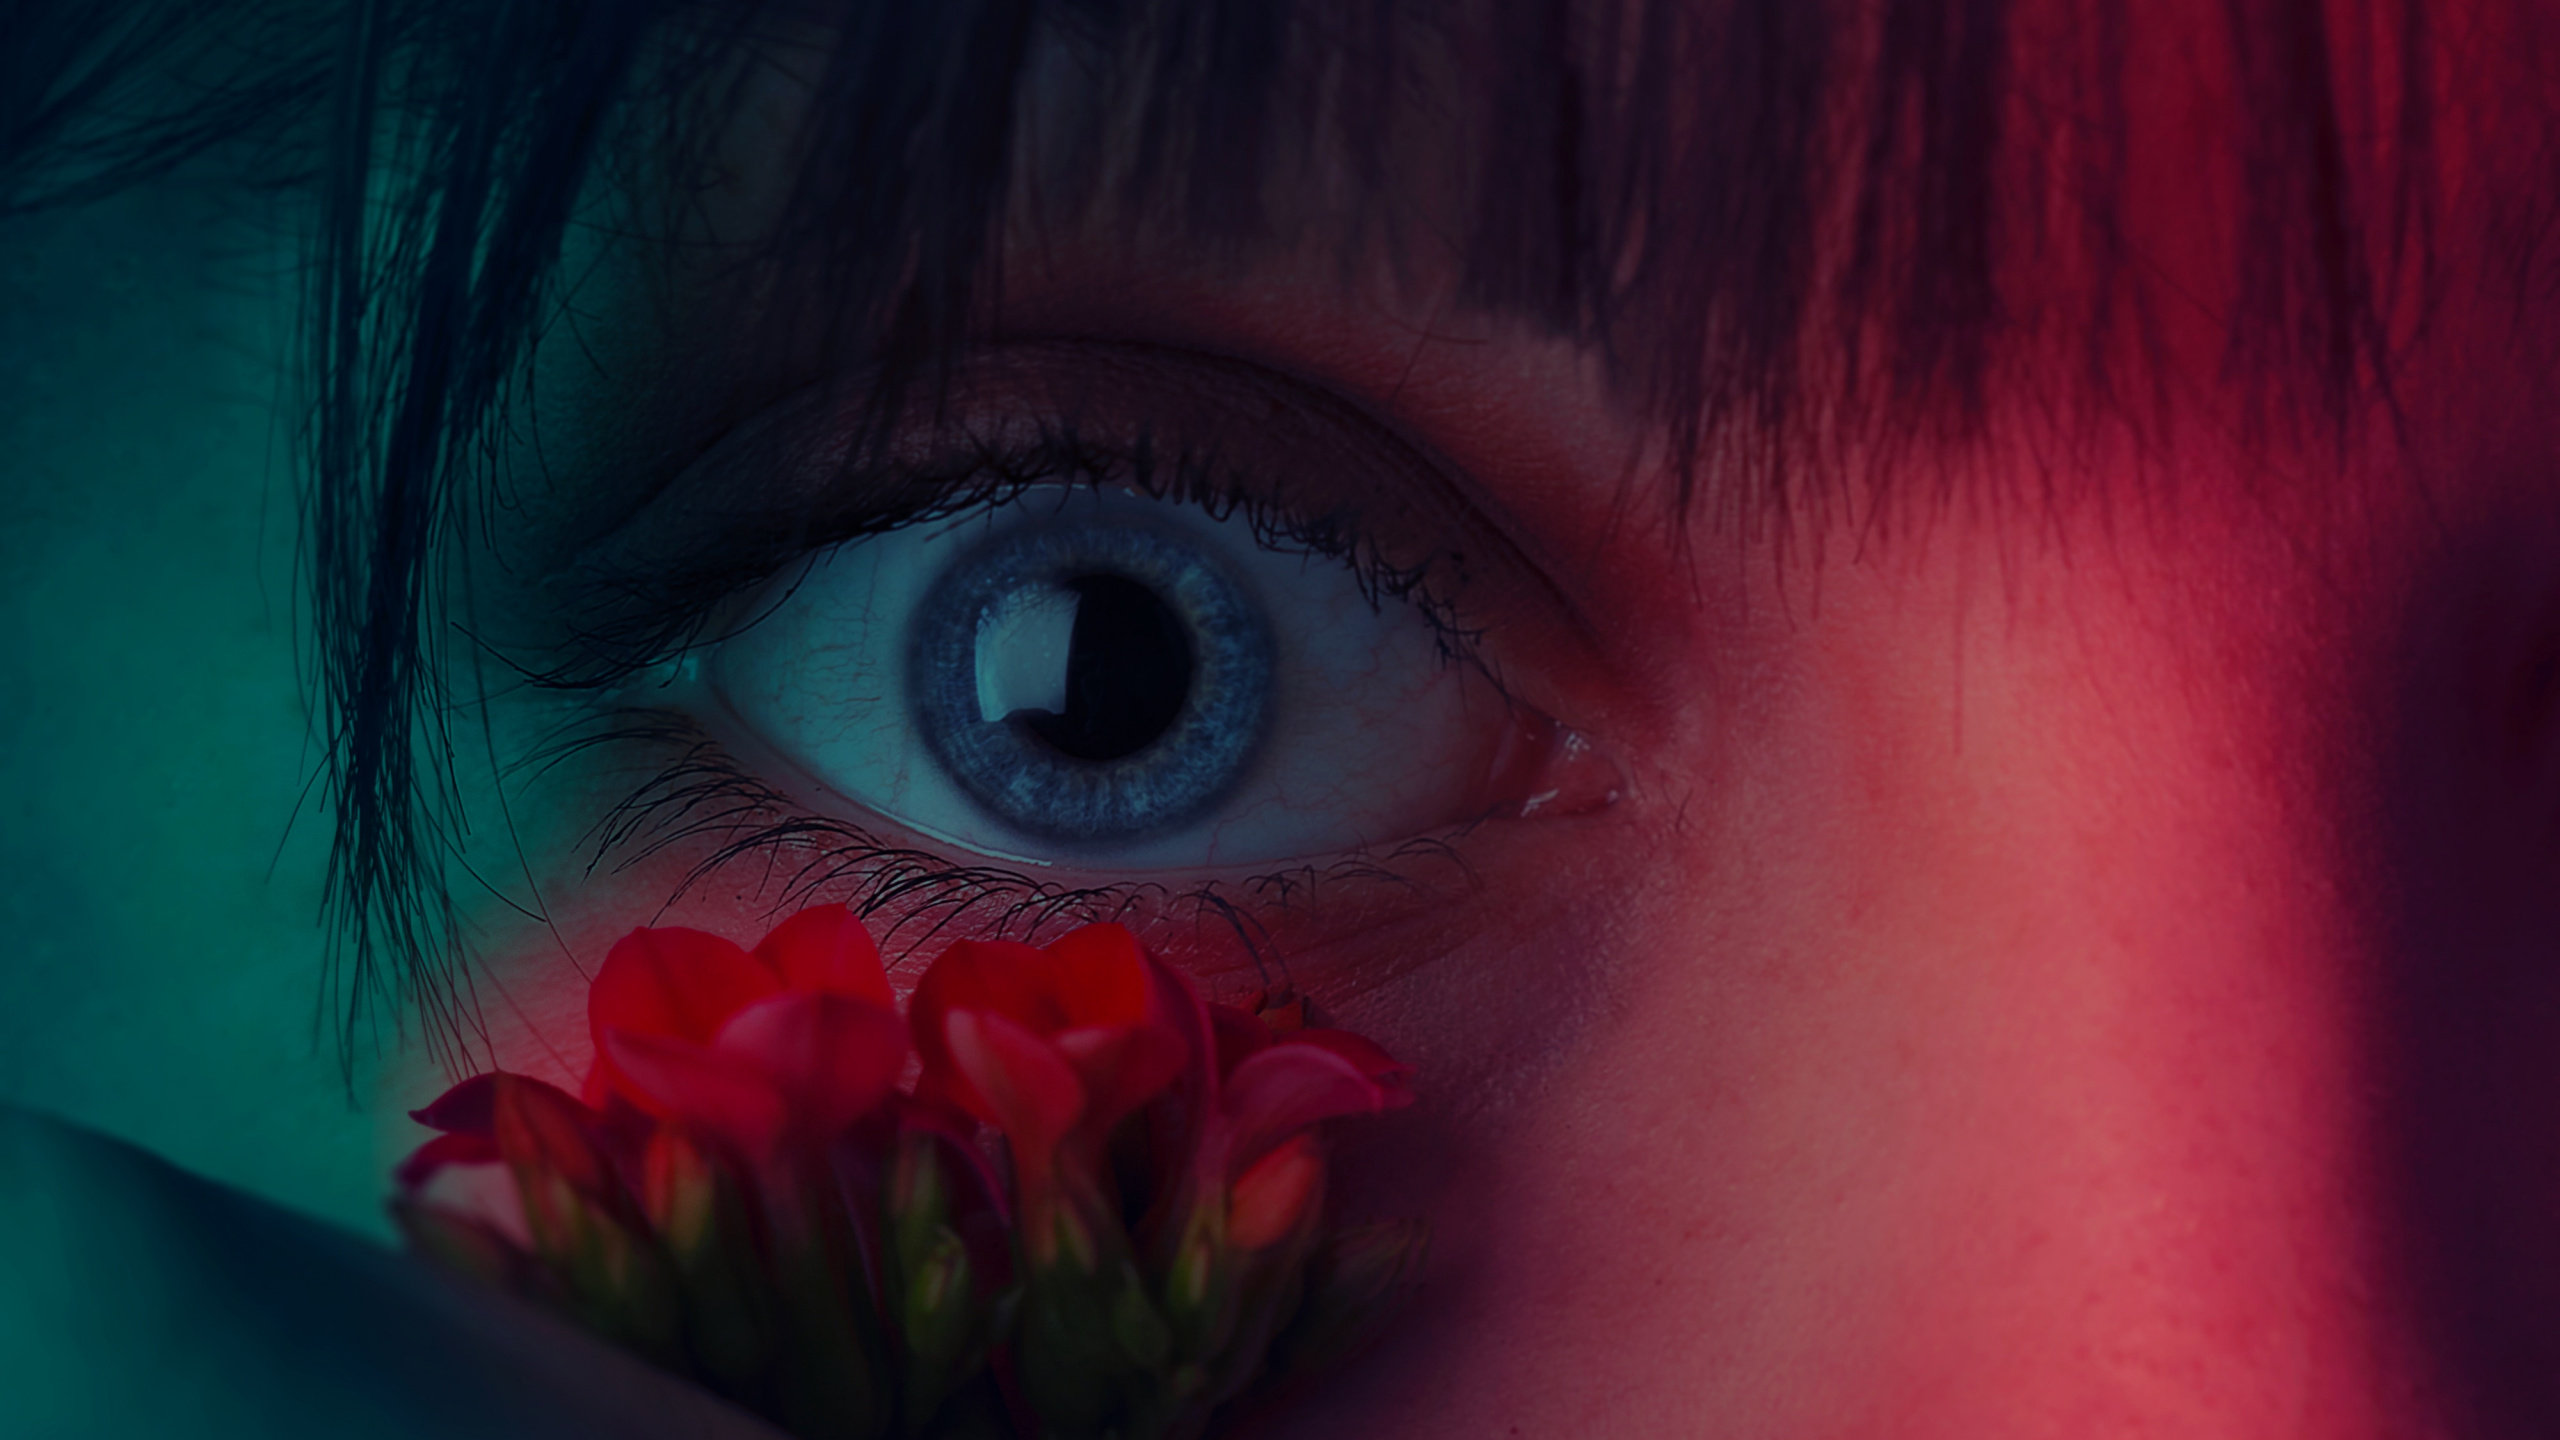 Girl With Red Flower on Her Face. Wallpaper in 2560x1440 Resolution